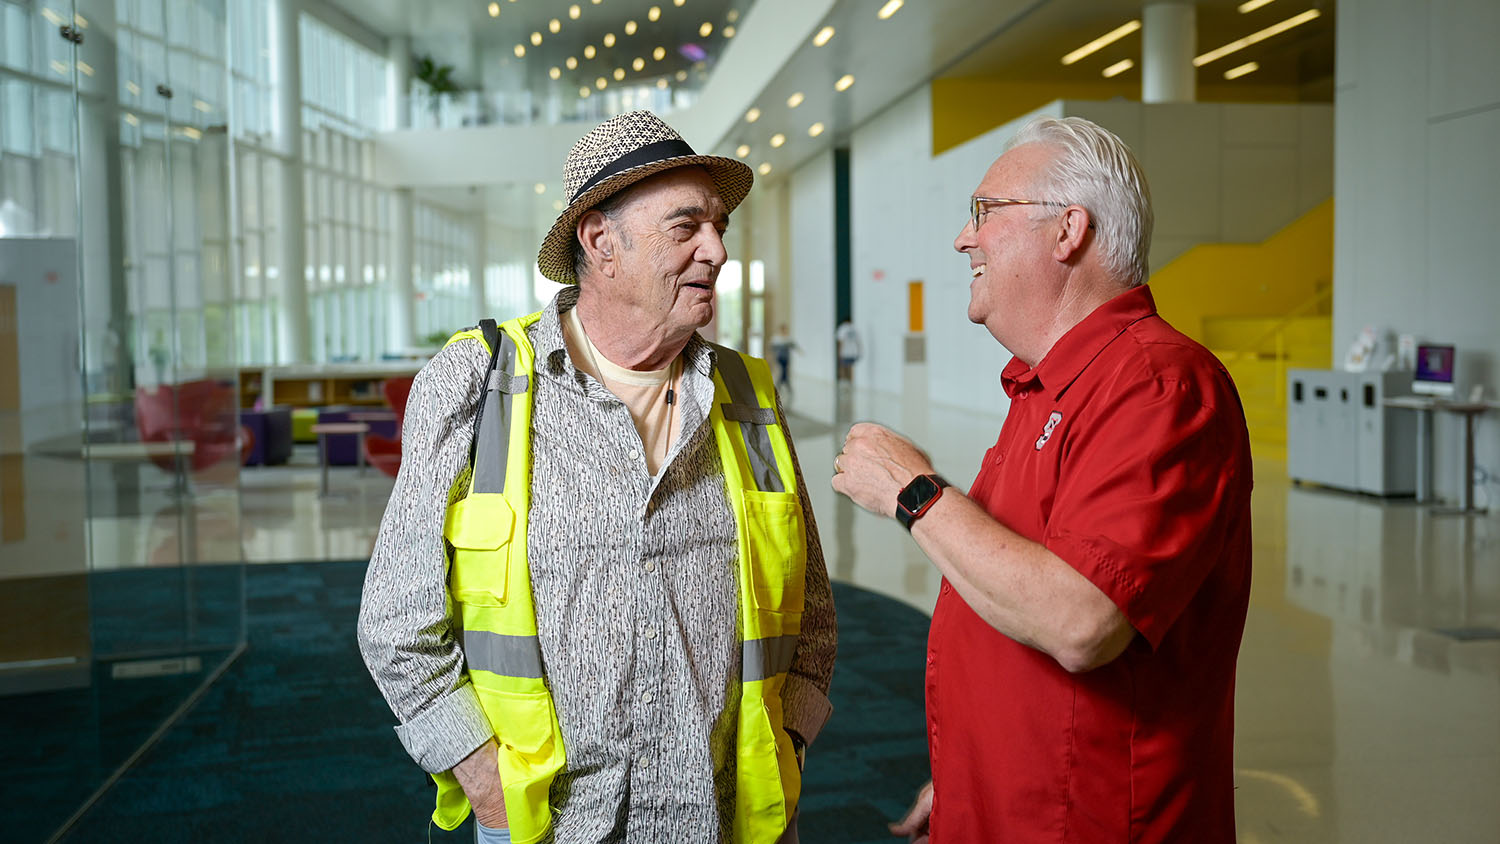 Artist Larry Bell and NC State Chancellor Randy Woodson share a laugh in the lobby of Hunt Library.